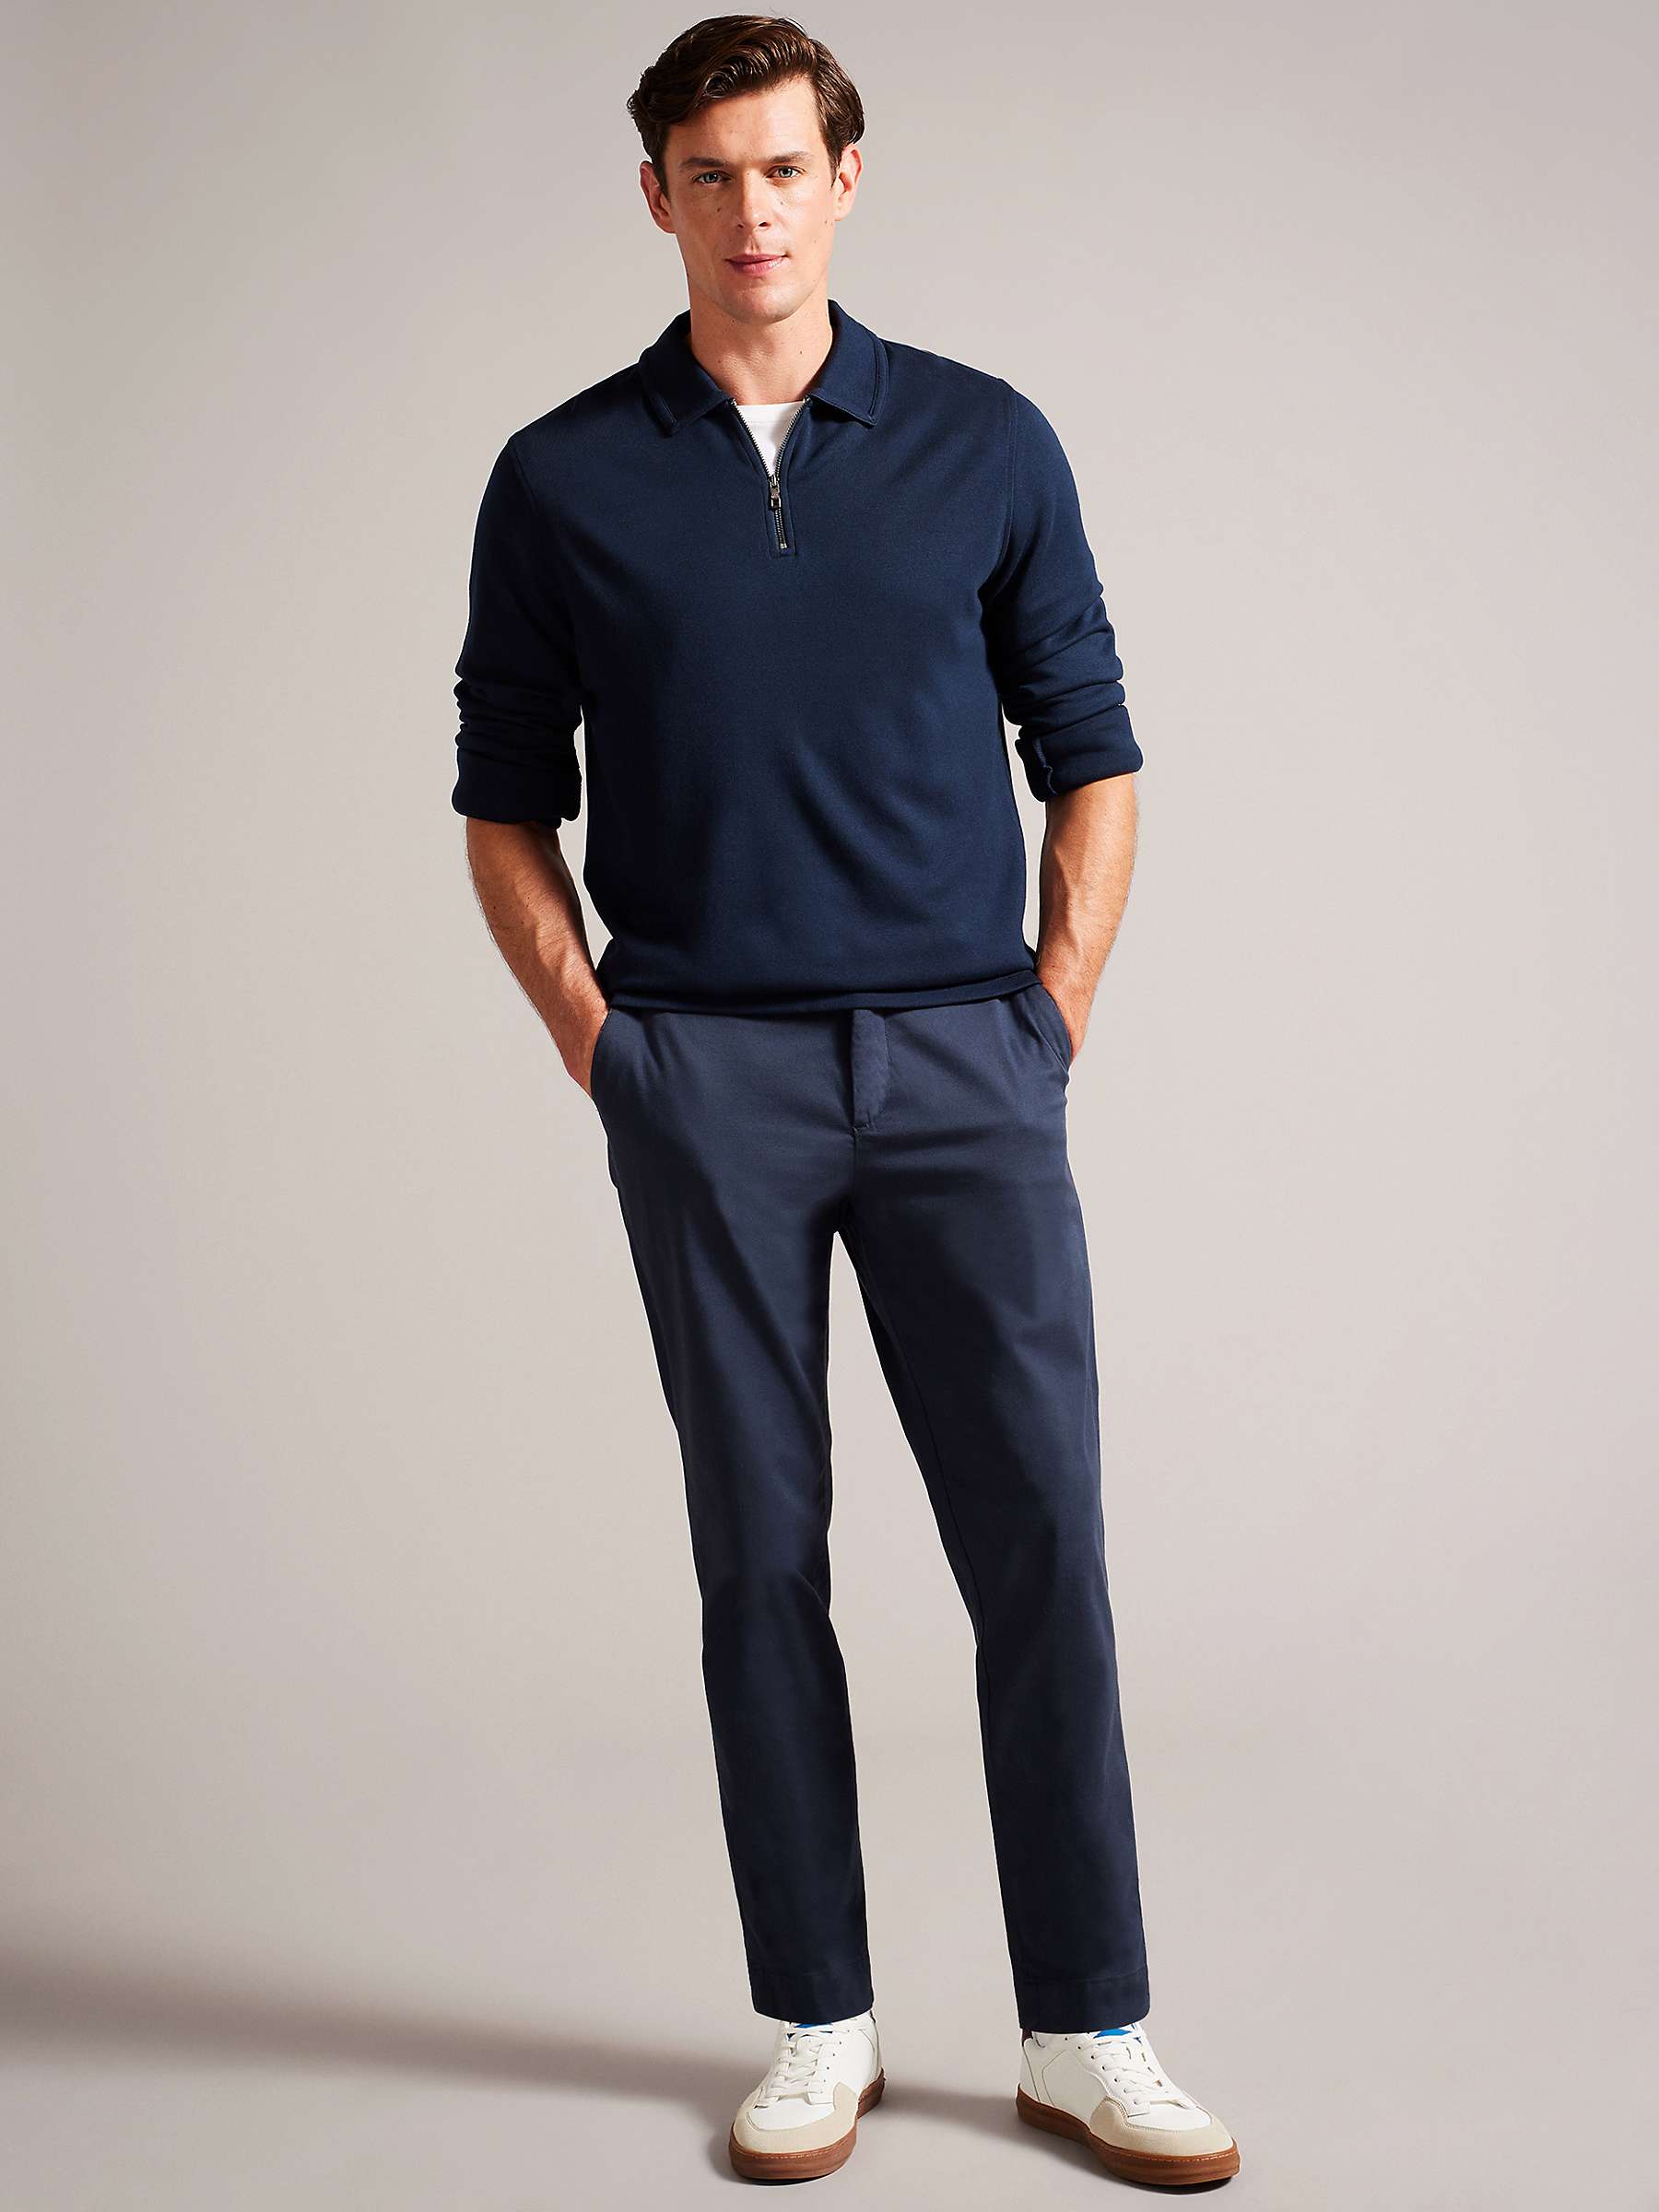 Buy Ted Baker Karpol Long Sleeve Soft Touch Polo Top Online at johnlewis.com